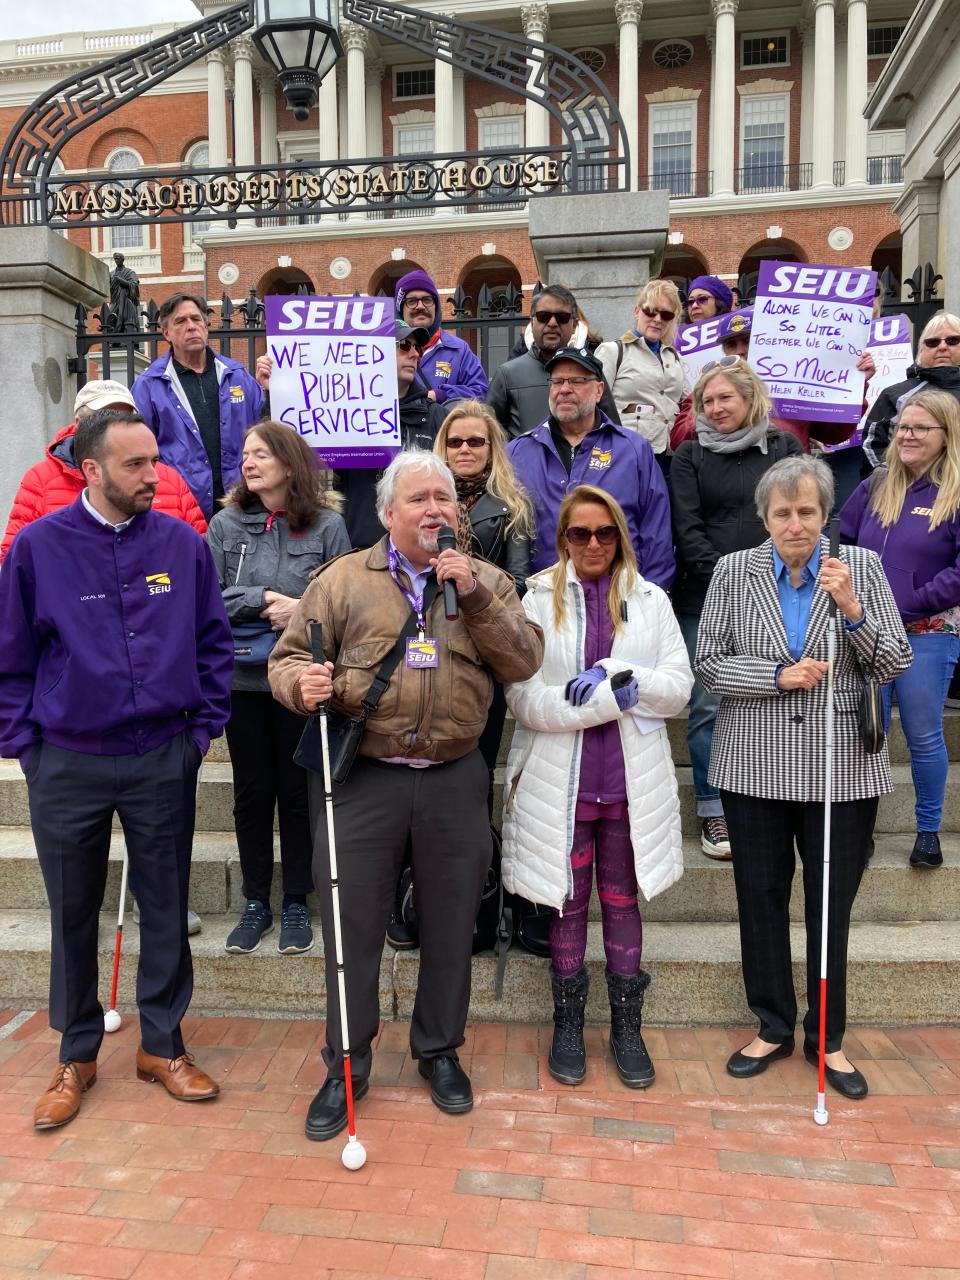 Union workers and clients of the Massachusetts Commission for the Blind rally to celebrate the ousting of the director, effective Friday after a no-confidence vote and a letter to the governor prompted the change in leadership.